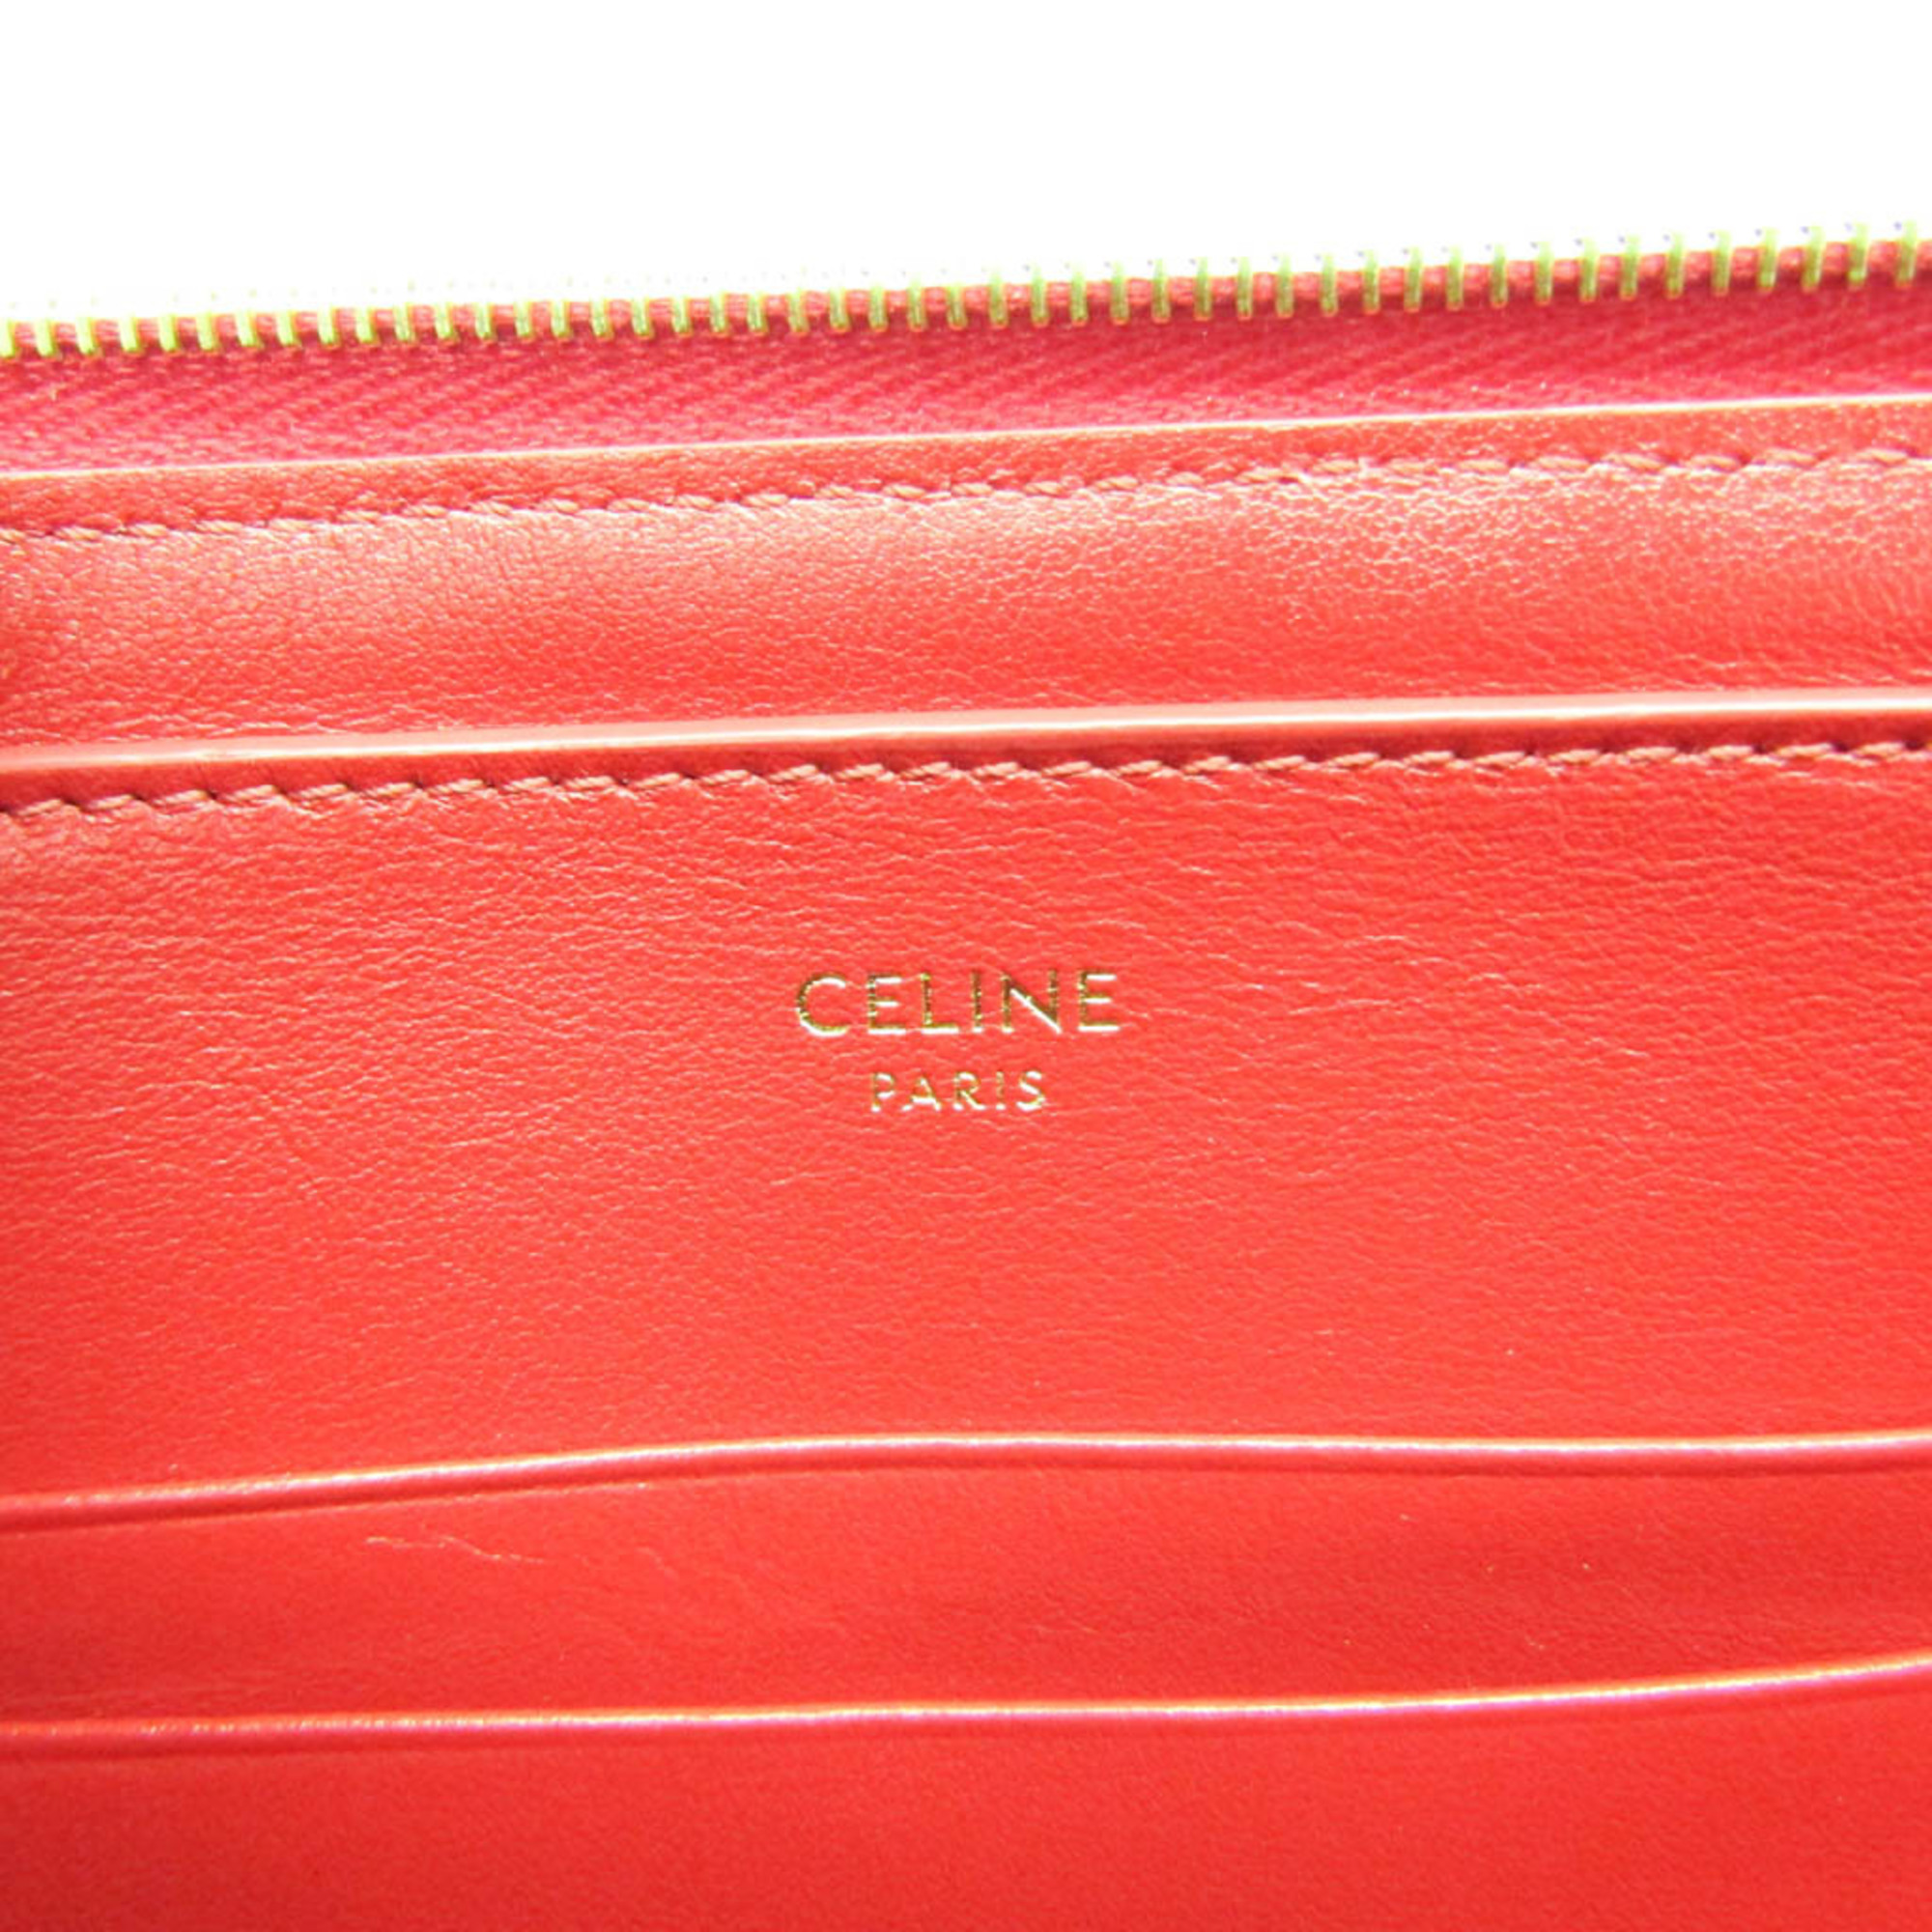 Celine C Charm 10B813BFL Women's Leather Clutch Bag,Pouch Red Color